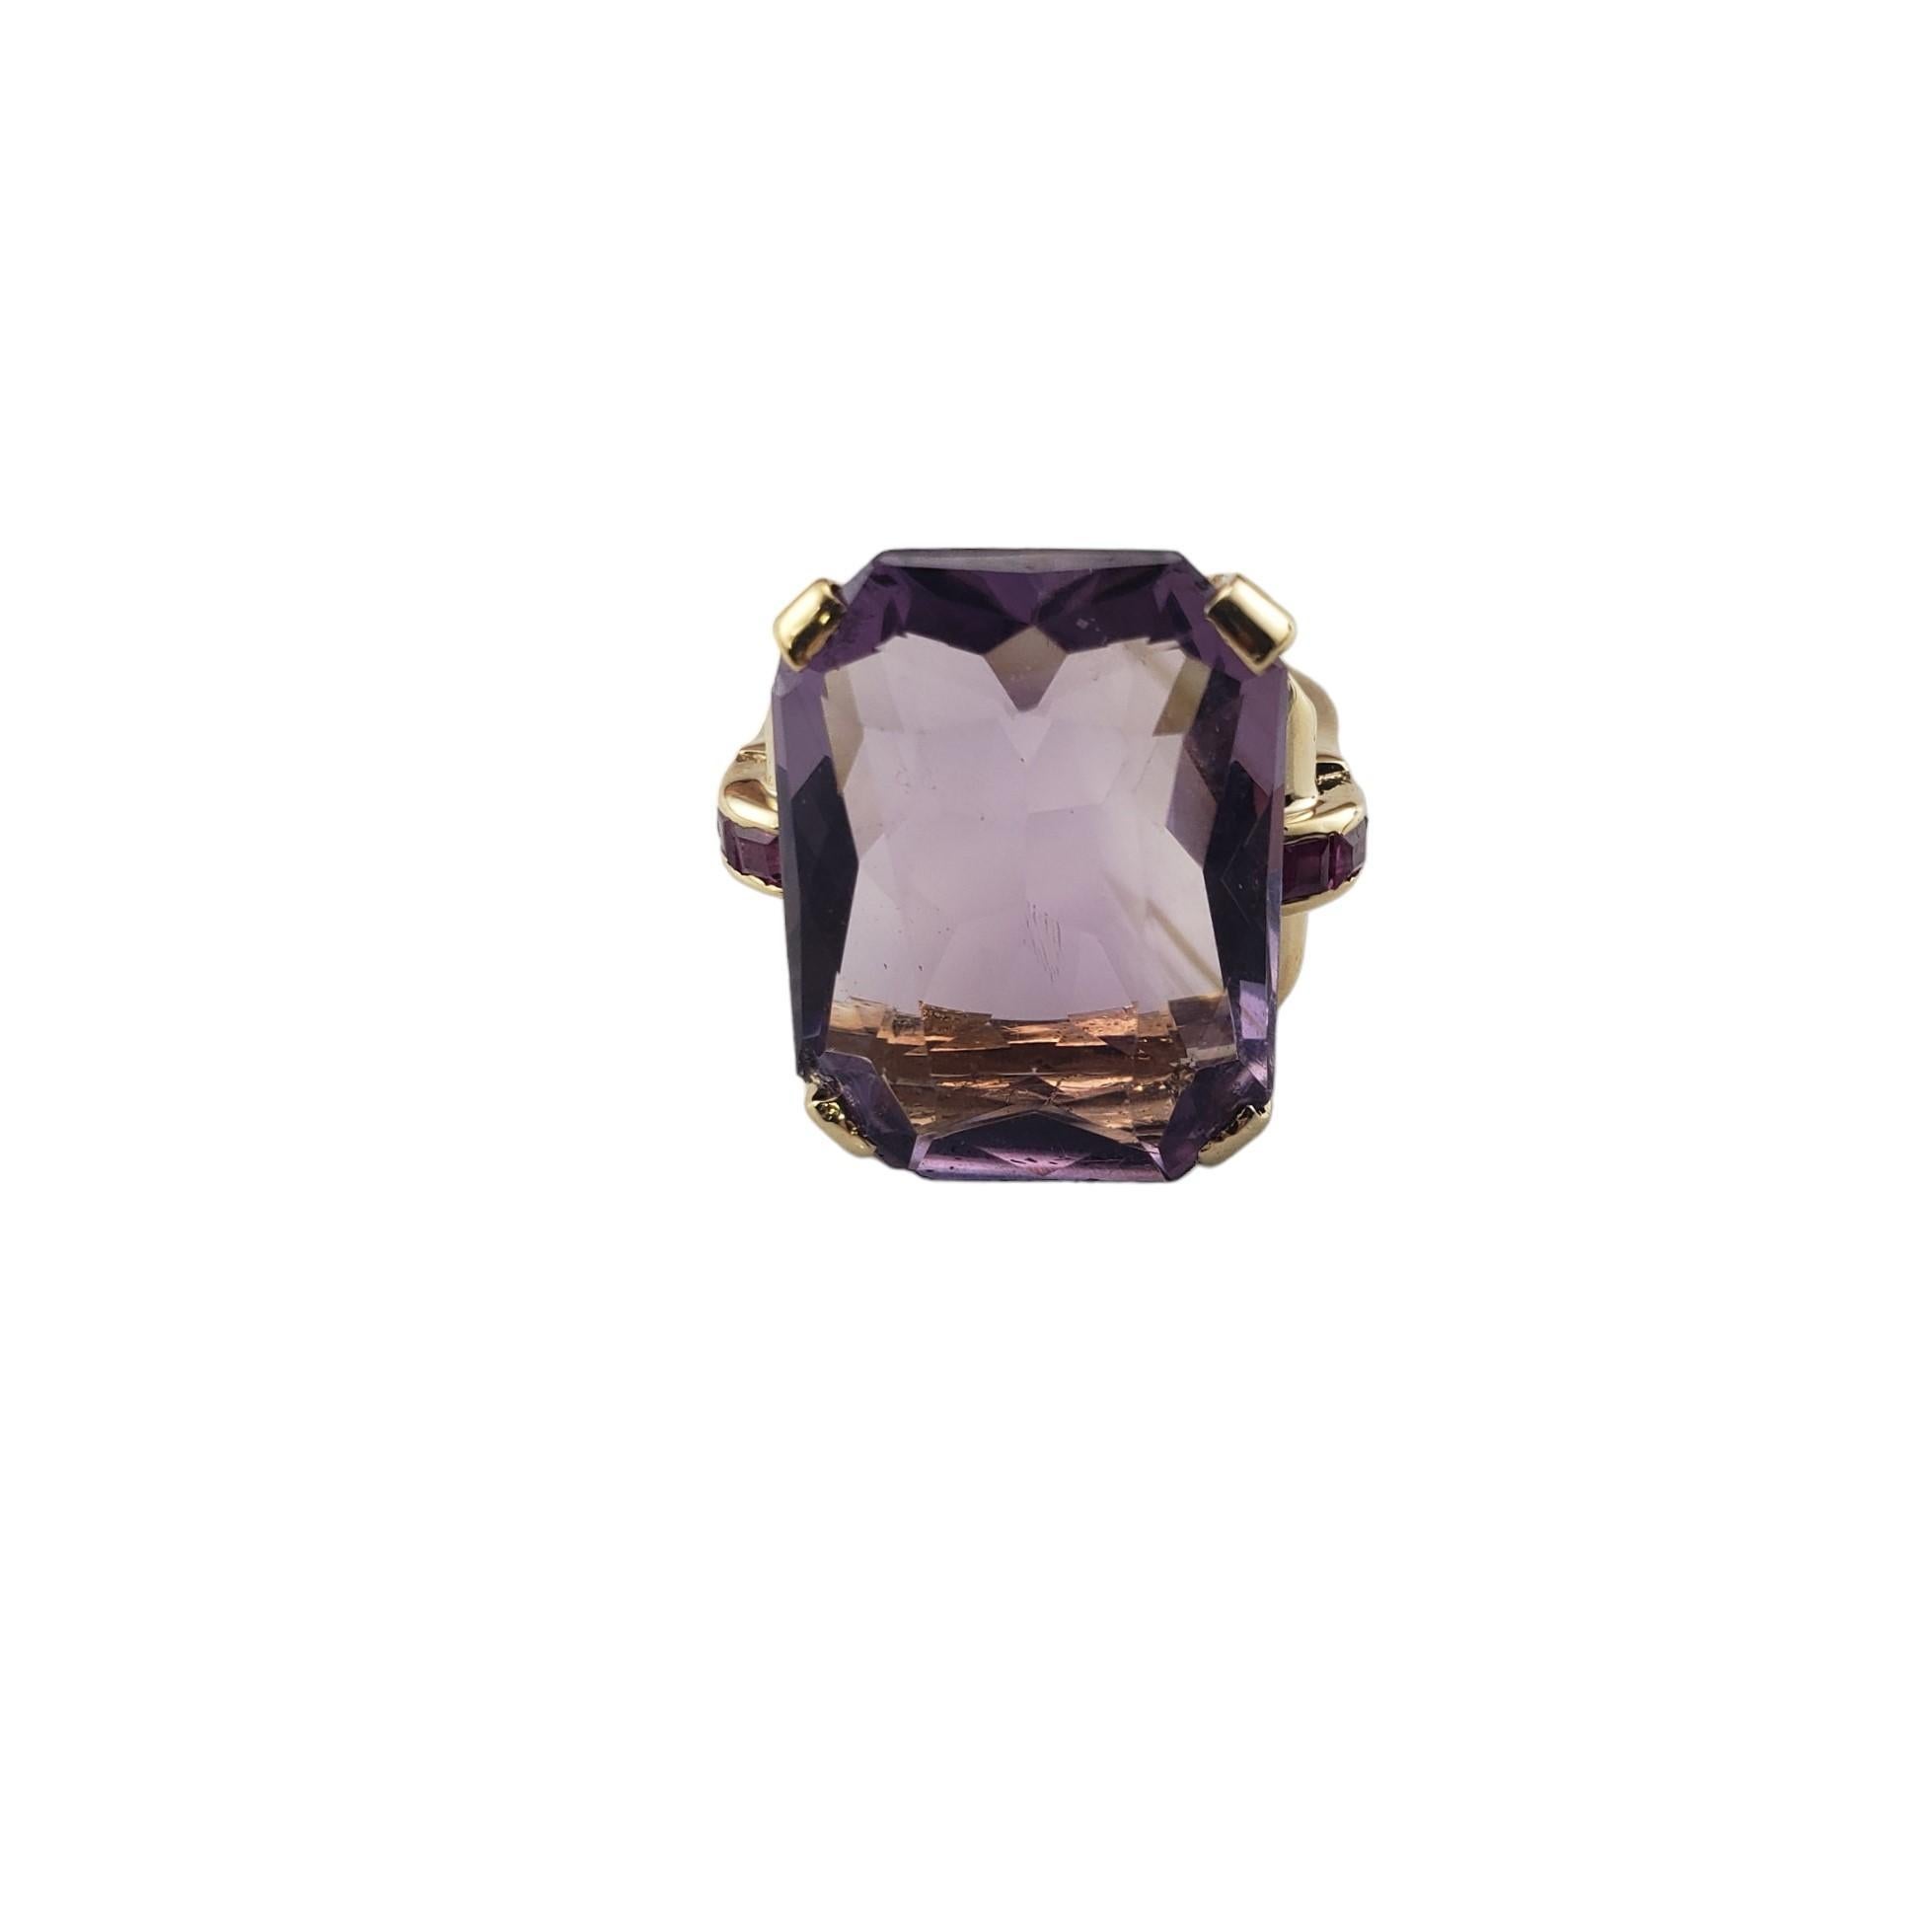 Vintage 14K Yellow Gold Amethyst and Rhodolite Garnet Ring Size 6.75 JAGi Certified-

This elegant ring features one radiant shaped cut amethyst 920 mm x 14.9 mm) and six square cut rhodolite garnets set in classic 14K yellow gold.  Shank: 2.1